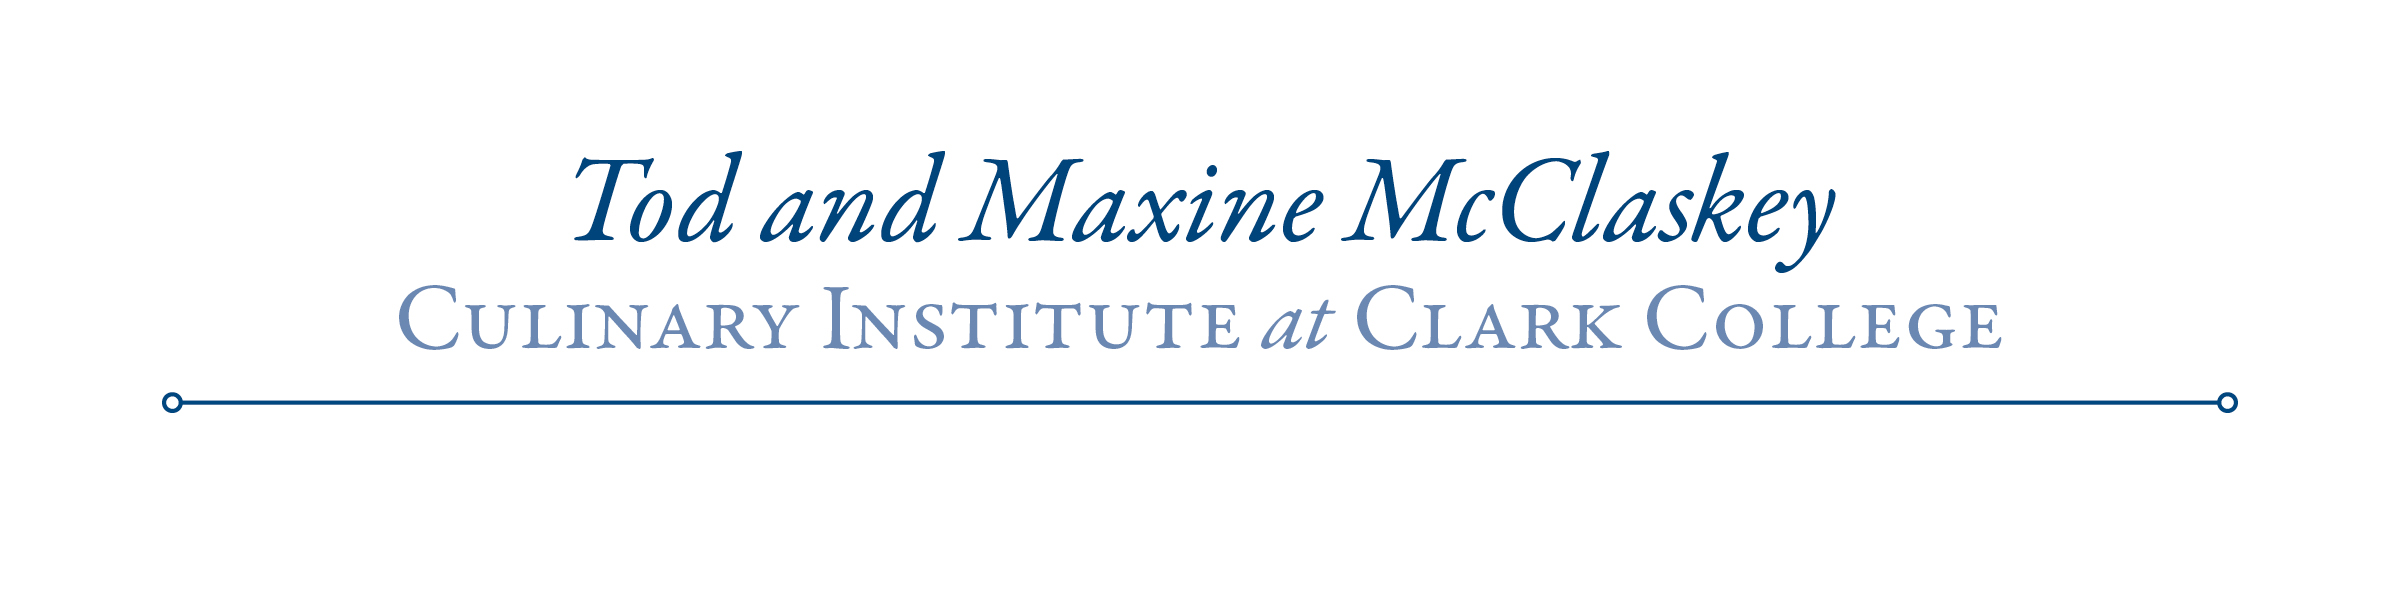 Tod and Maxine McClaskey Culinary Institute at Clark College